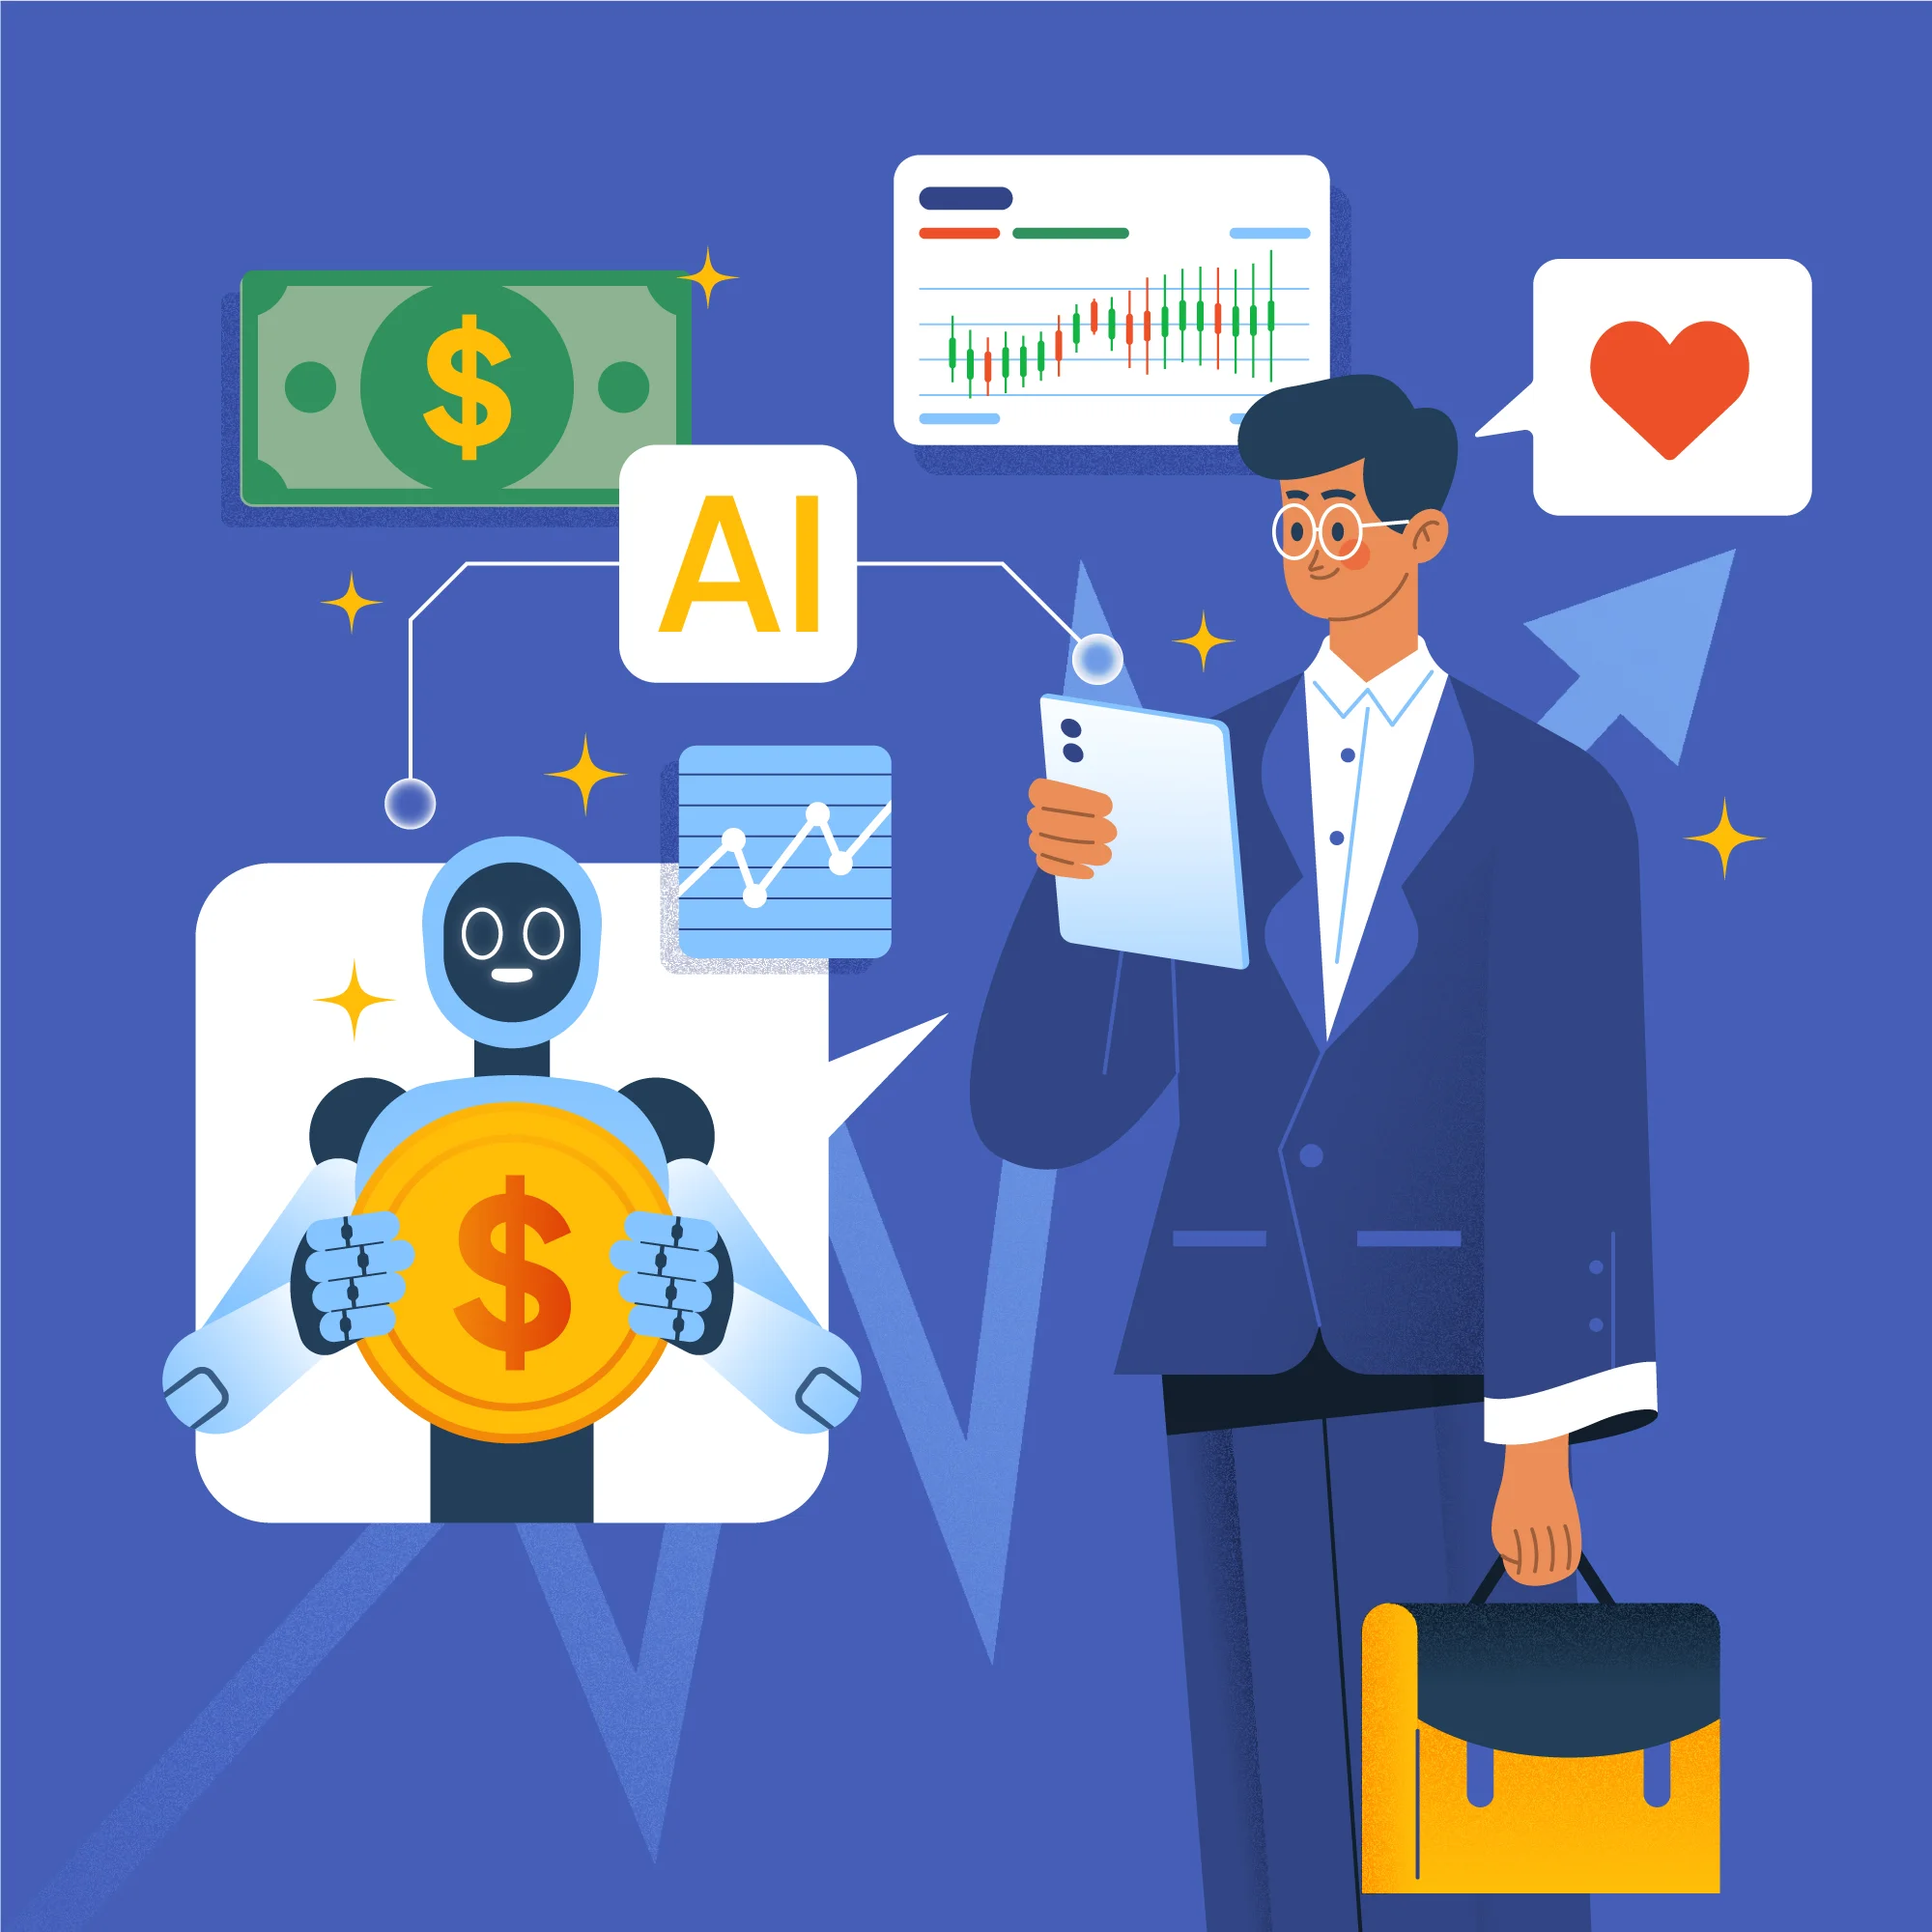 Google Ads AI Summaries: Now Live for Select Advertisers